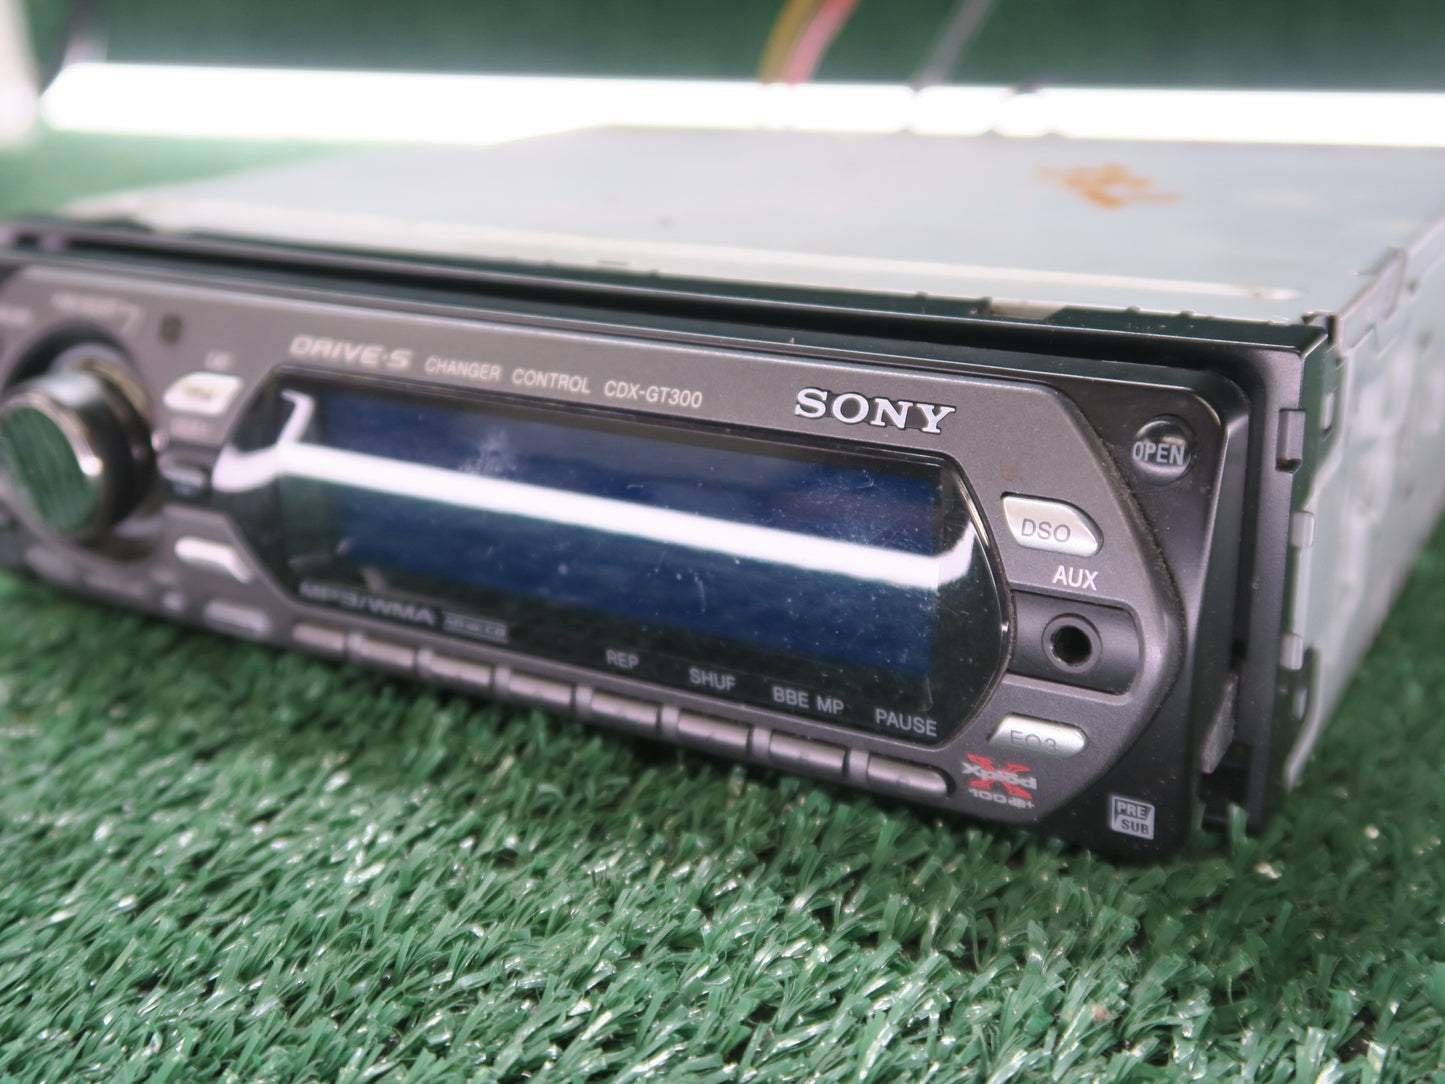 SONY CDX-GT300 Car Stereo Radio CD AUX Head Unit Excellent Condition